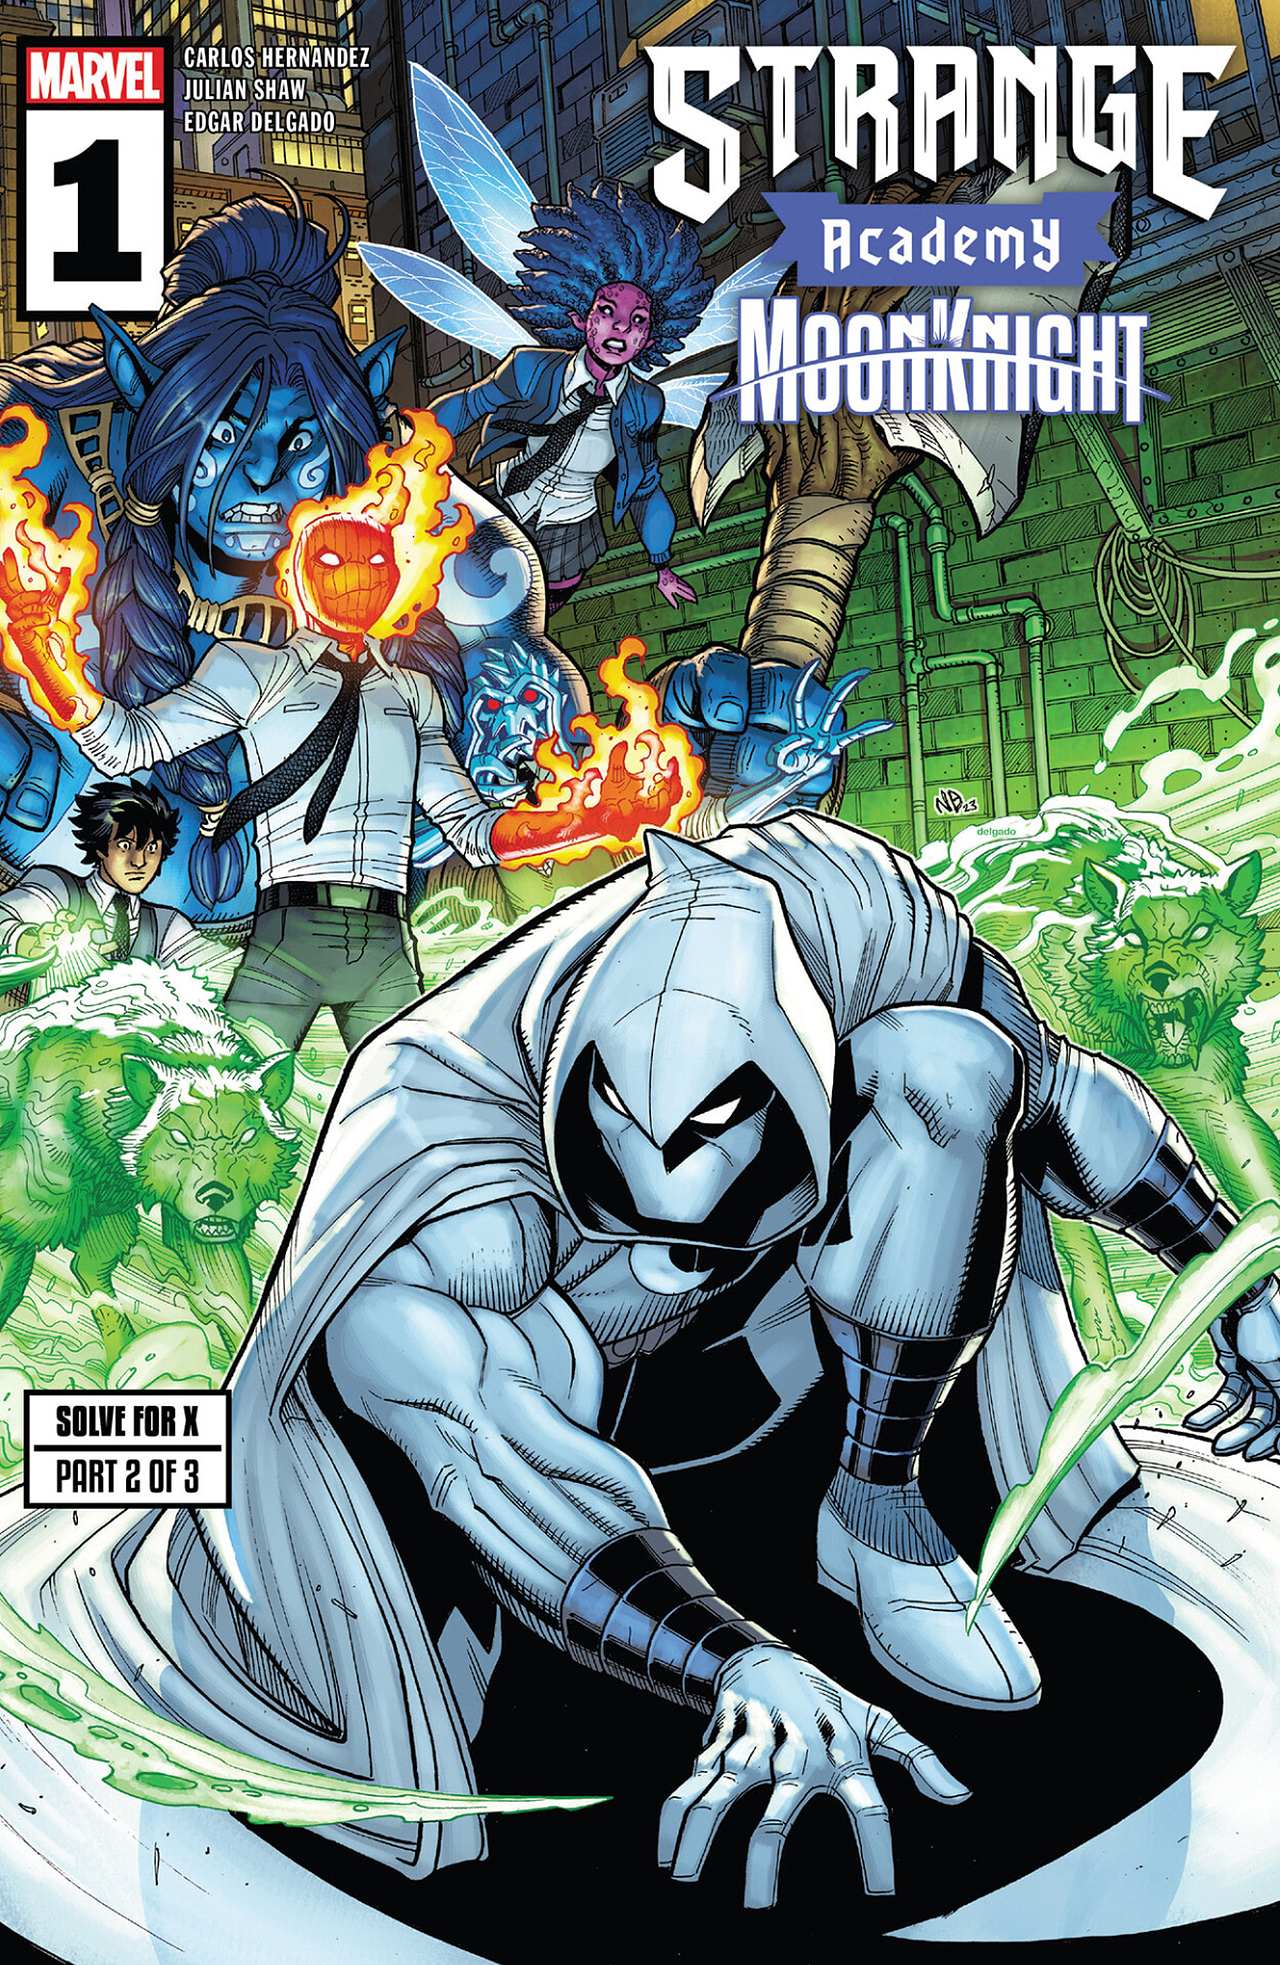 Strange Academy: Moon Knight (2023-): Chapter 1 - Page 1